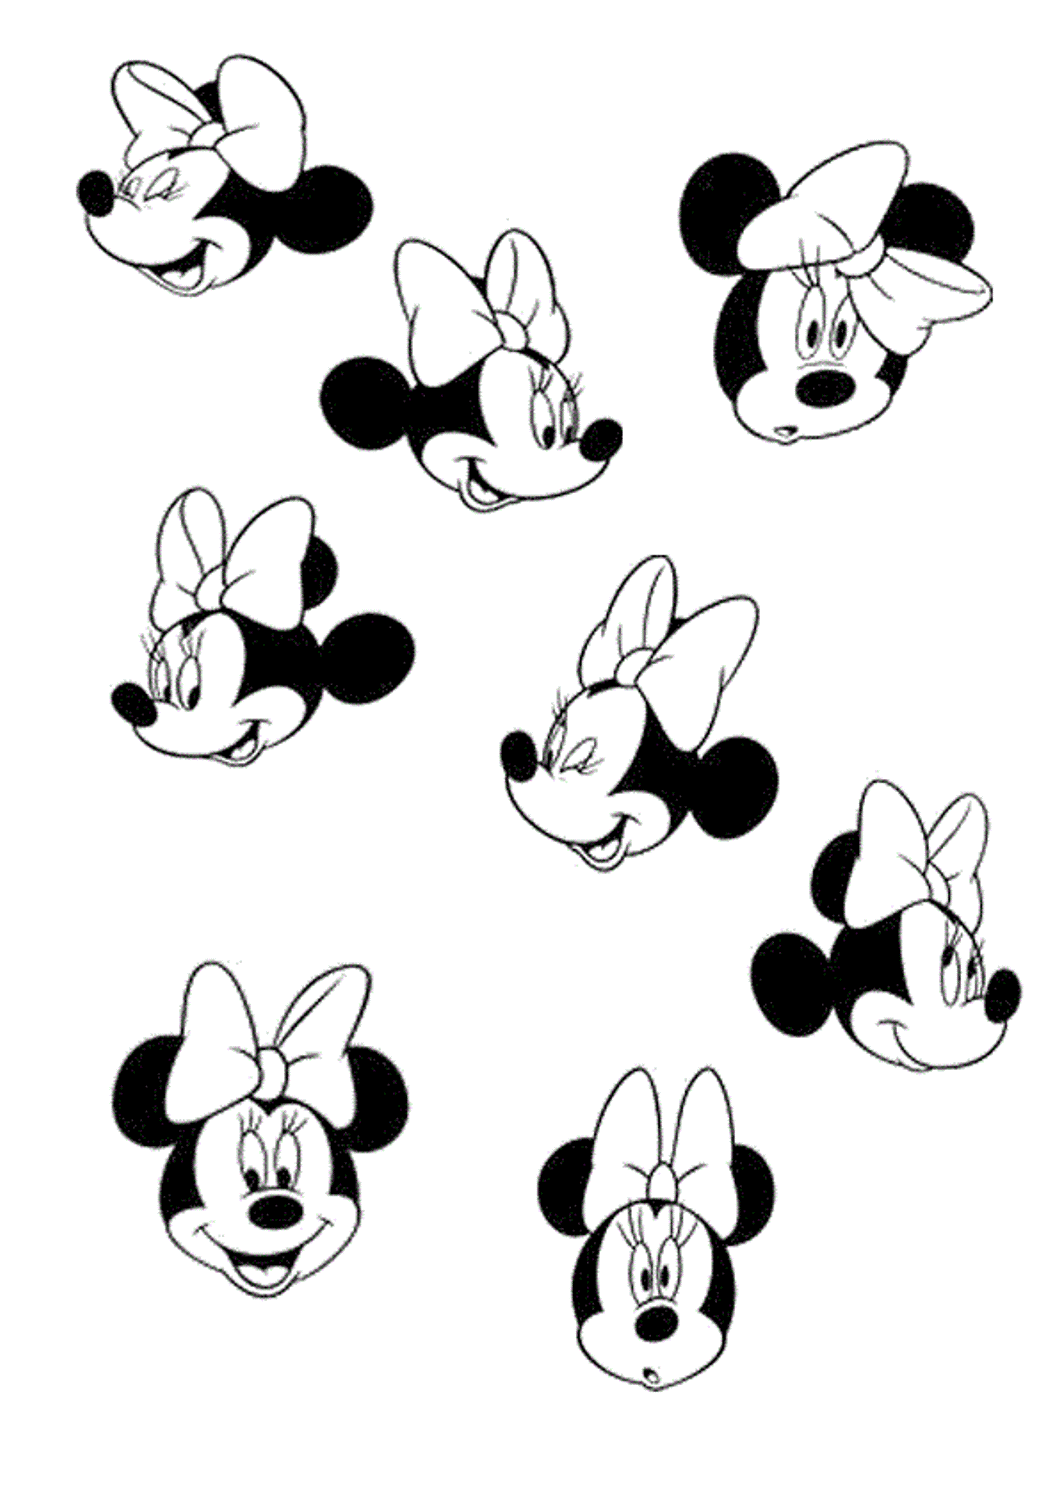 Faces Of Minnie Mouse